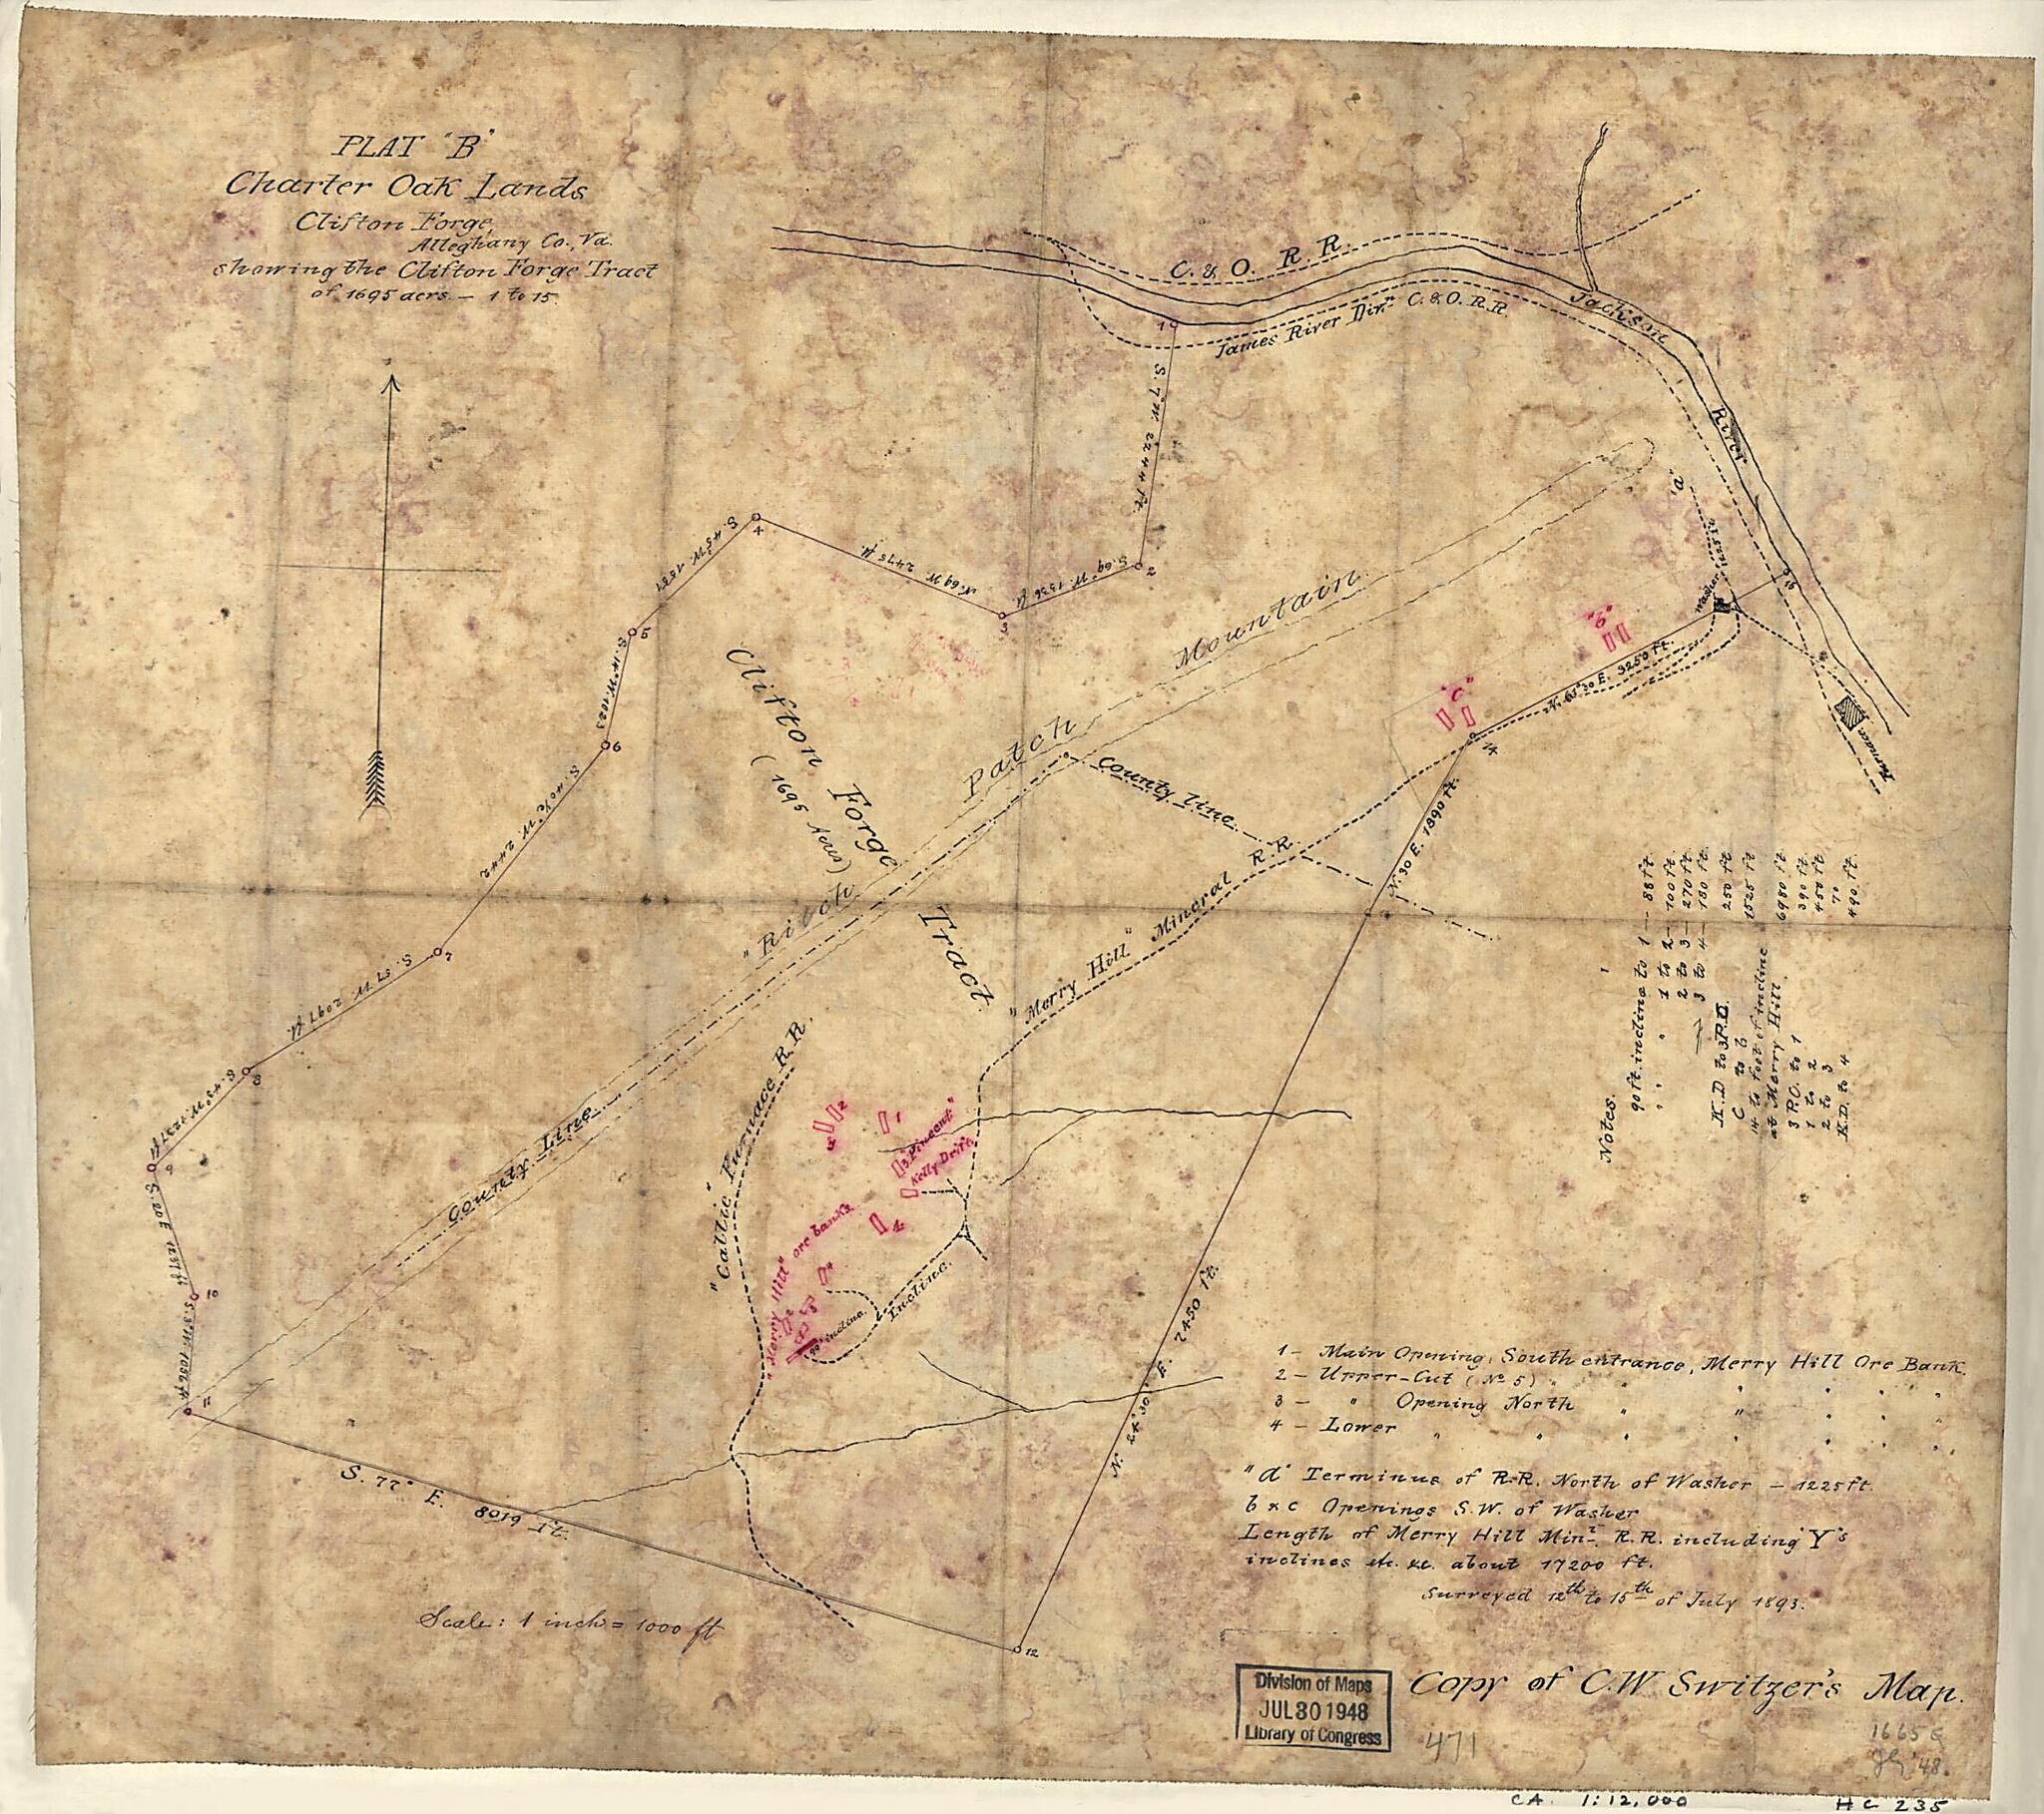 This old map of Plat B, Charter Oak Lands, Clifton Forge, Alleghany County, Va., Showing the Clifton Forge Tract of 1695 Acrs., 1 to 15 from 1893 was created by C. W. Switzer in 1893